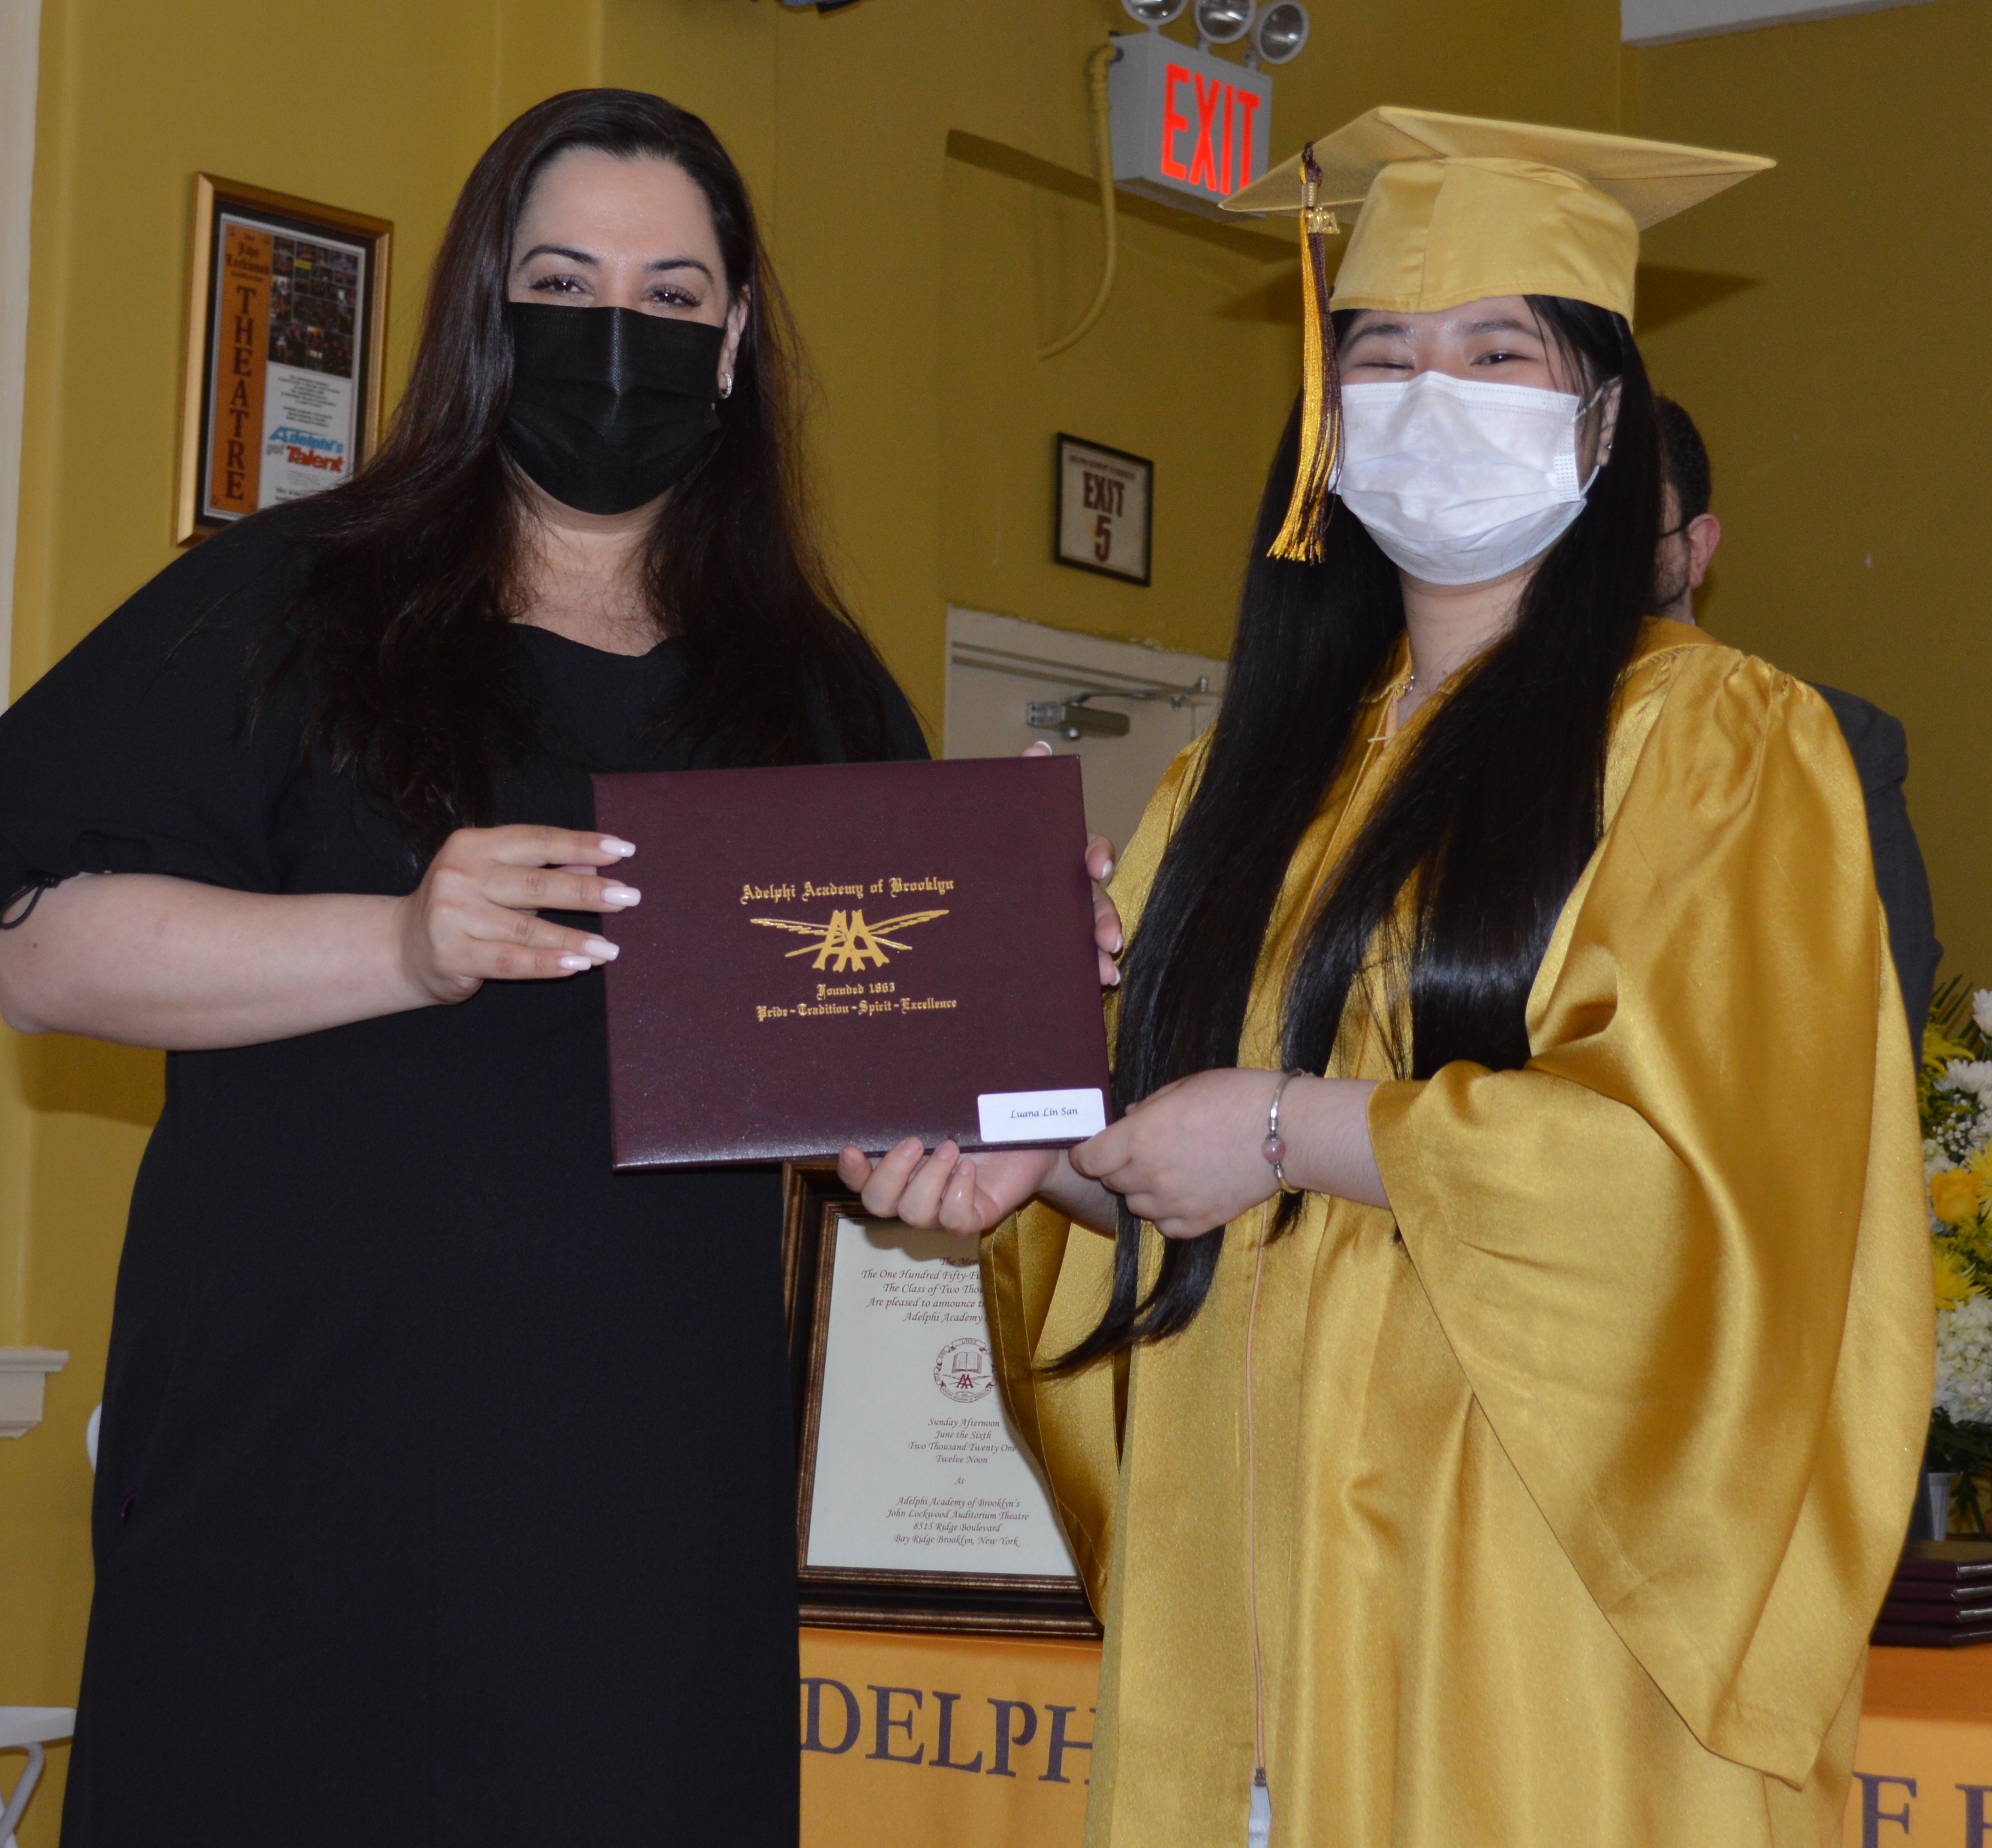 Head of School Ms. Romanos presents Class of 2021 member Luana with her diploma!